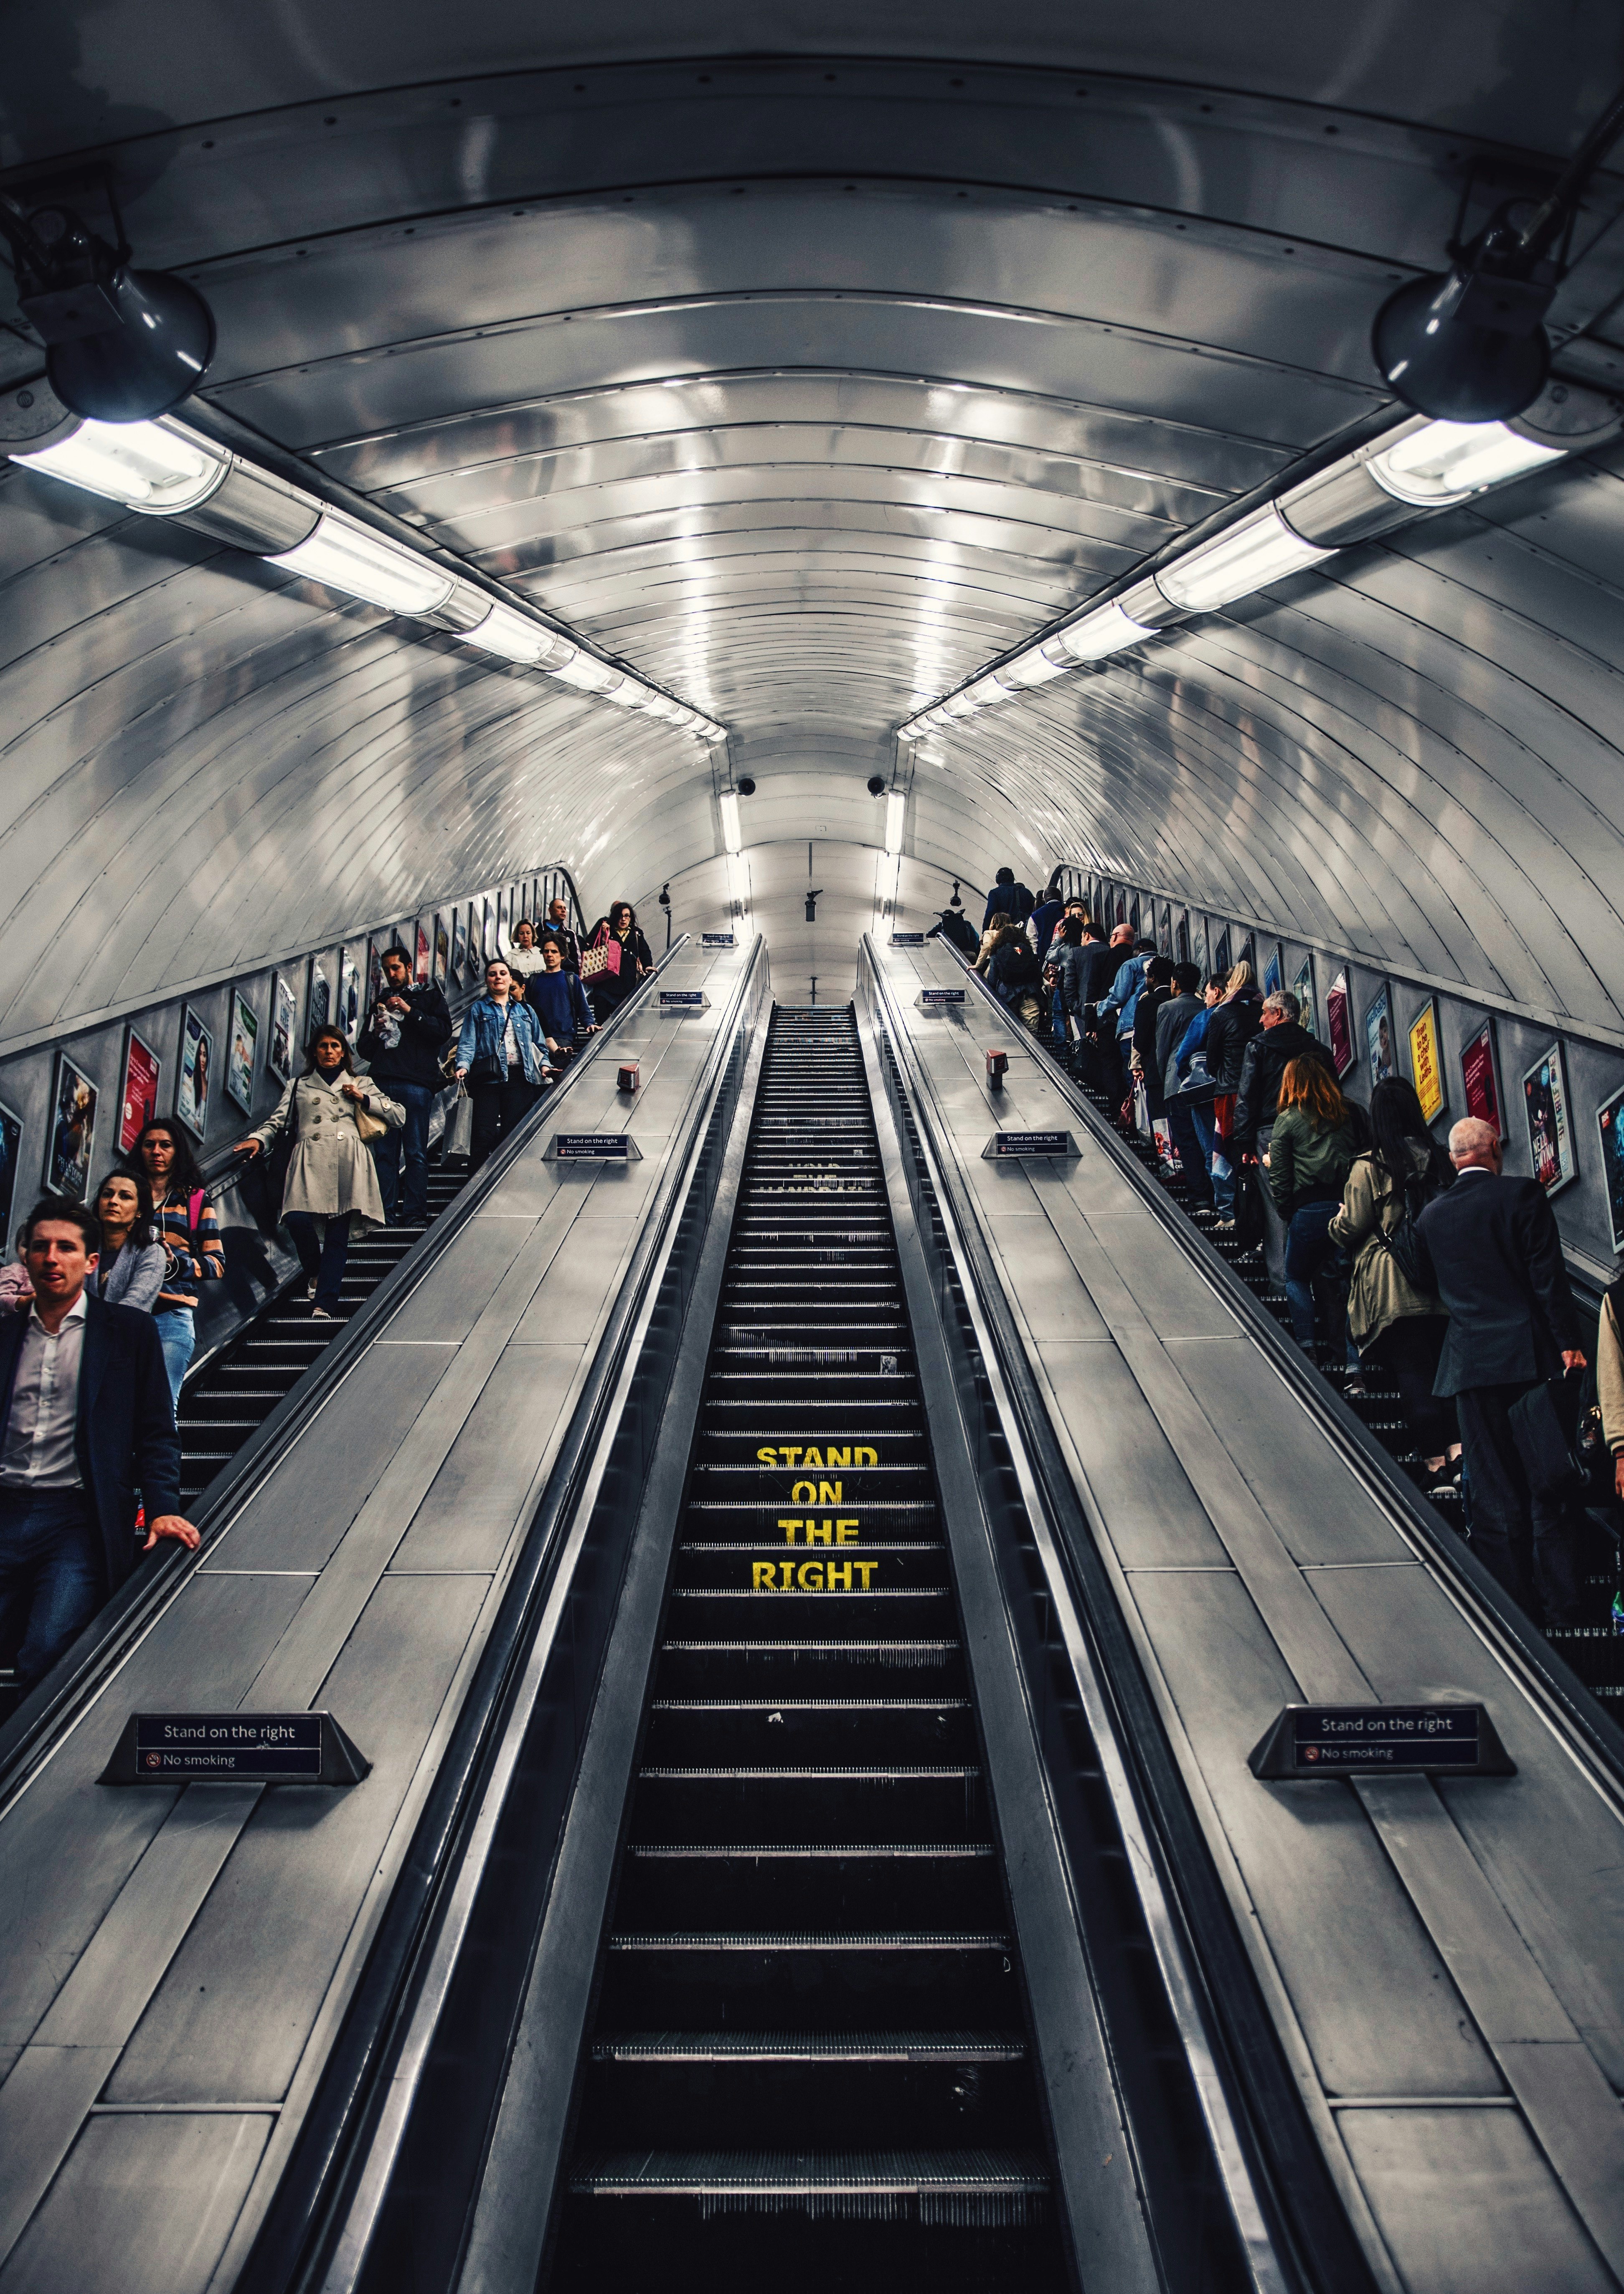 Rush hour in London Underground. Stand on the Right >